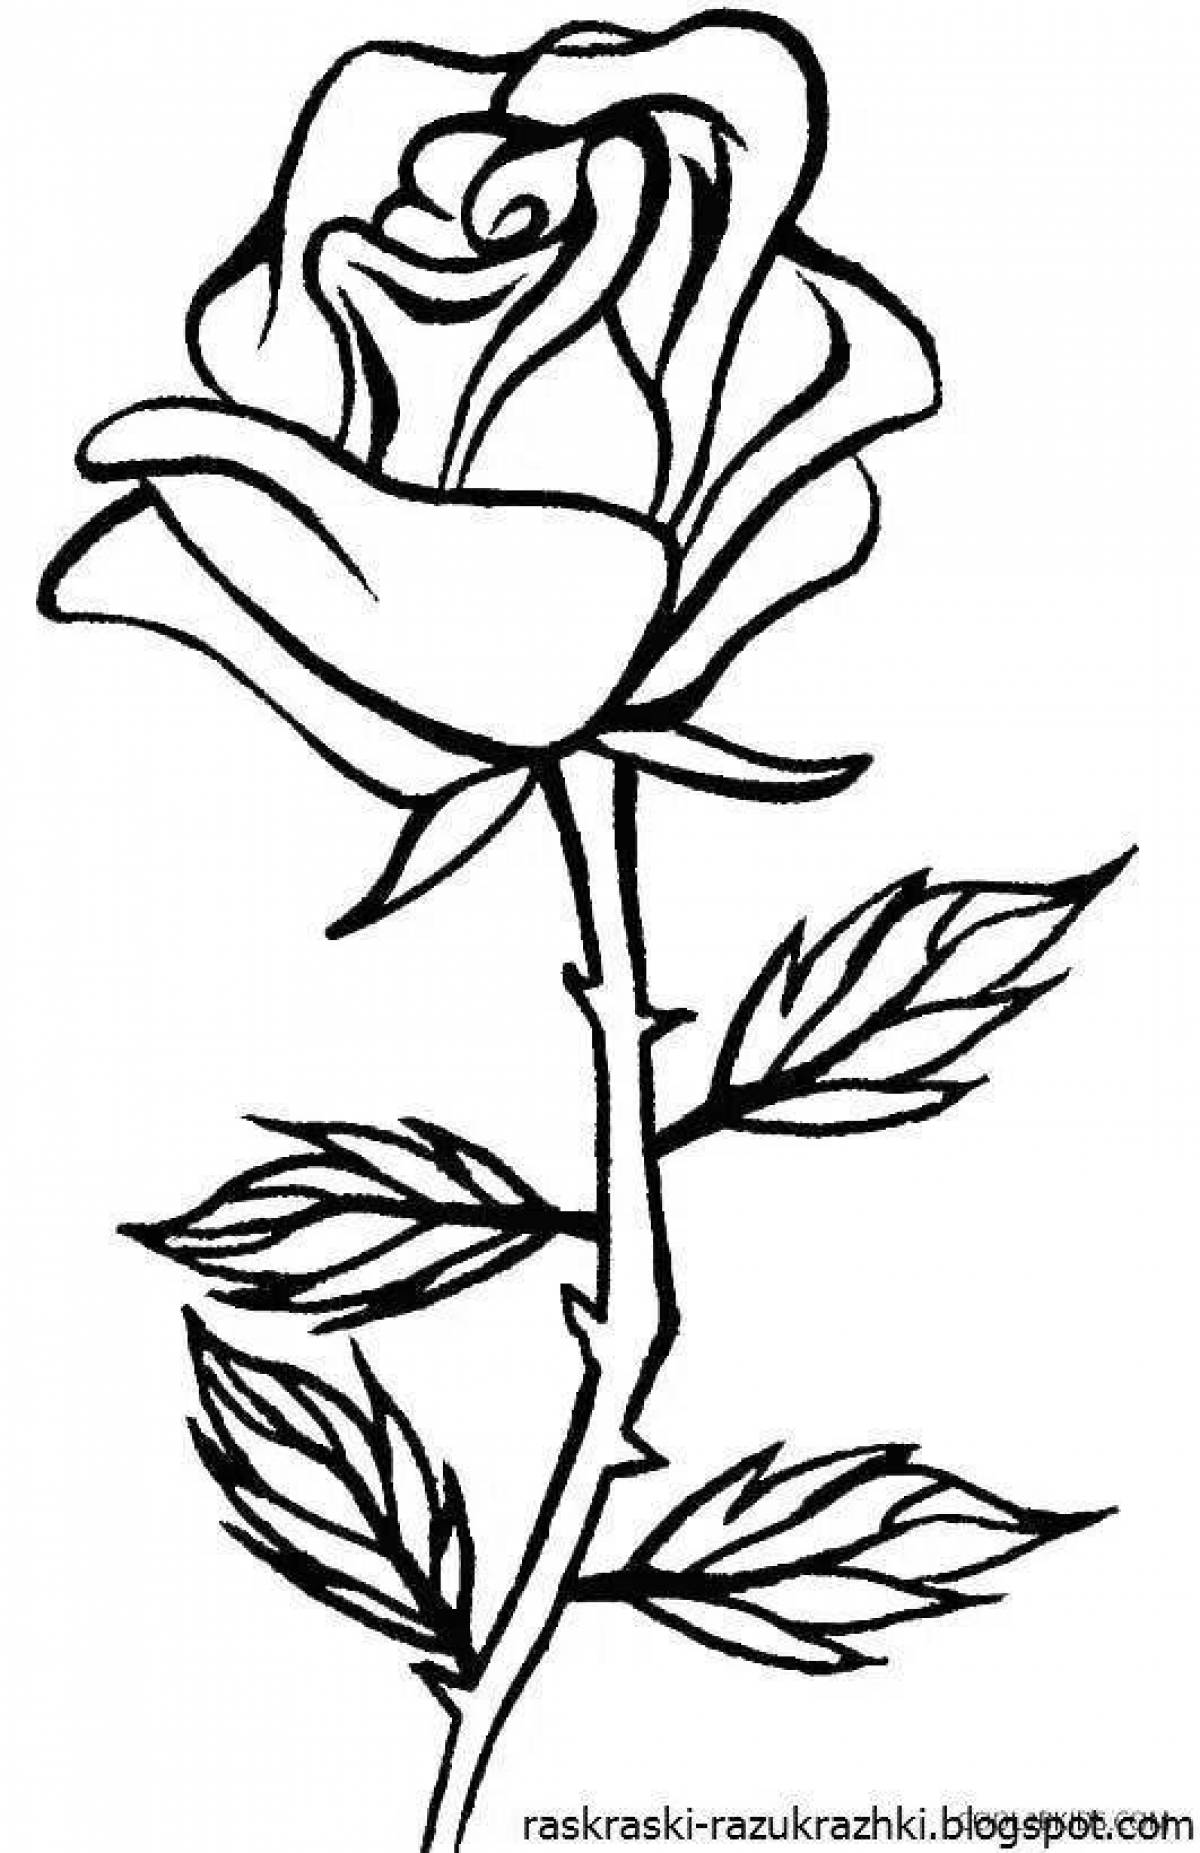 Elegant coloring picture of a rose